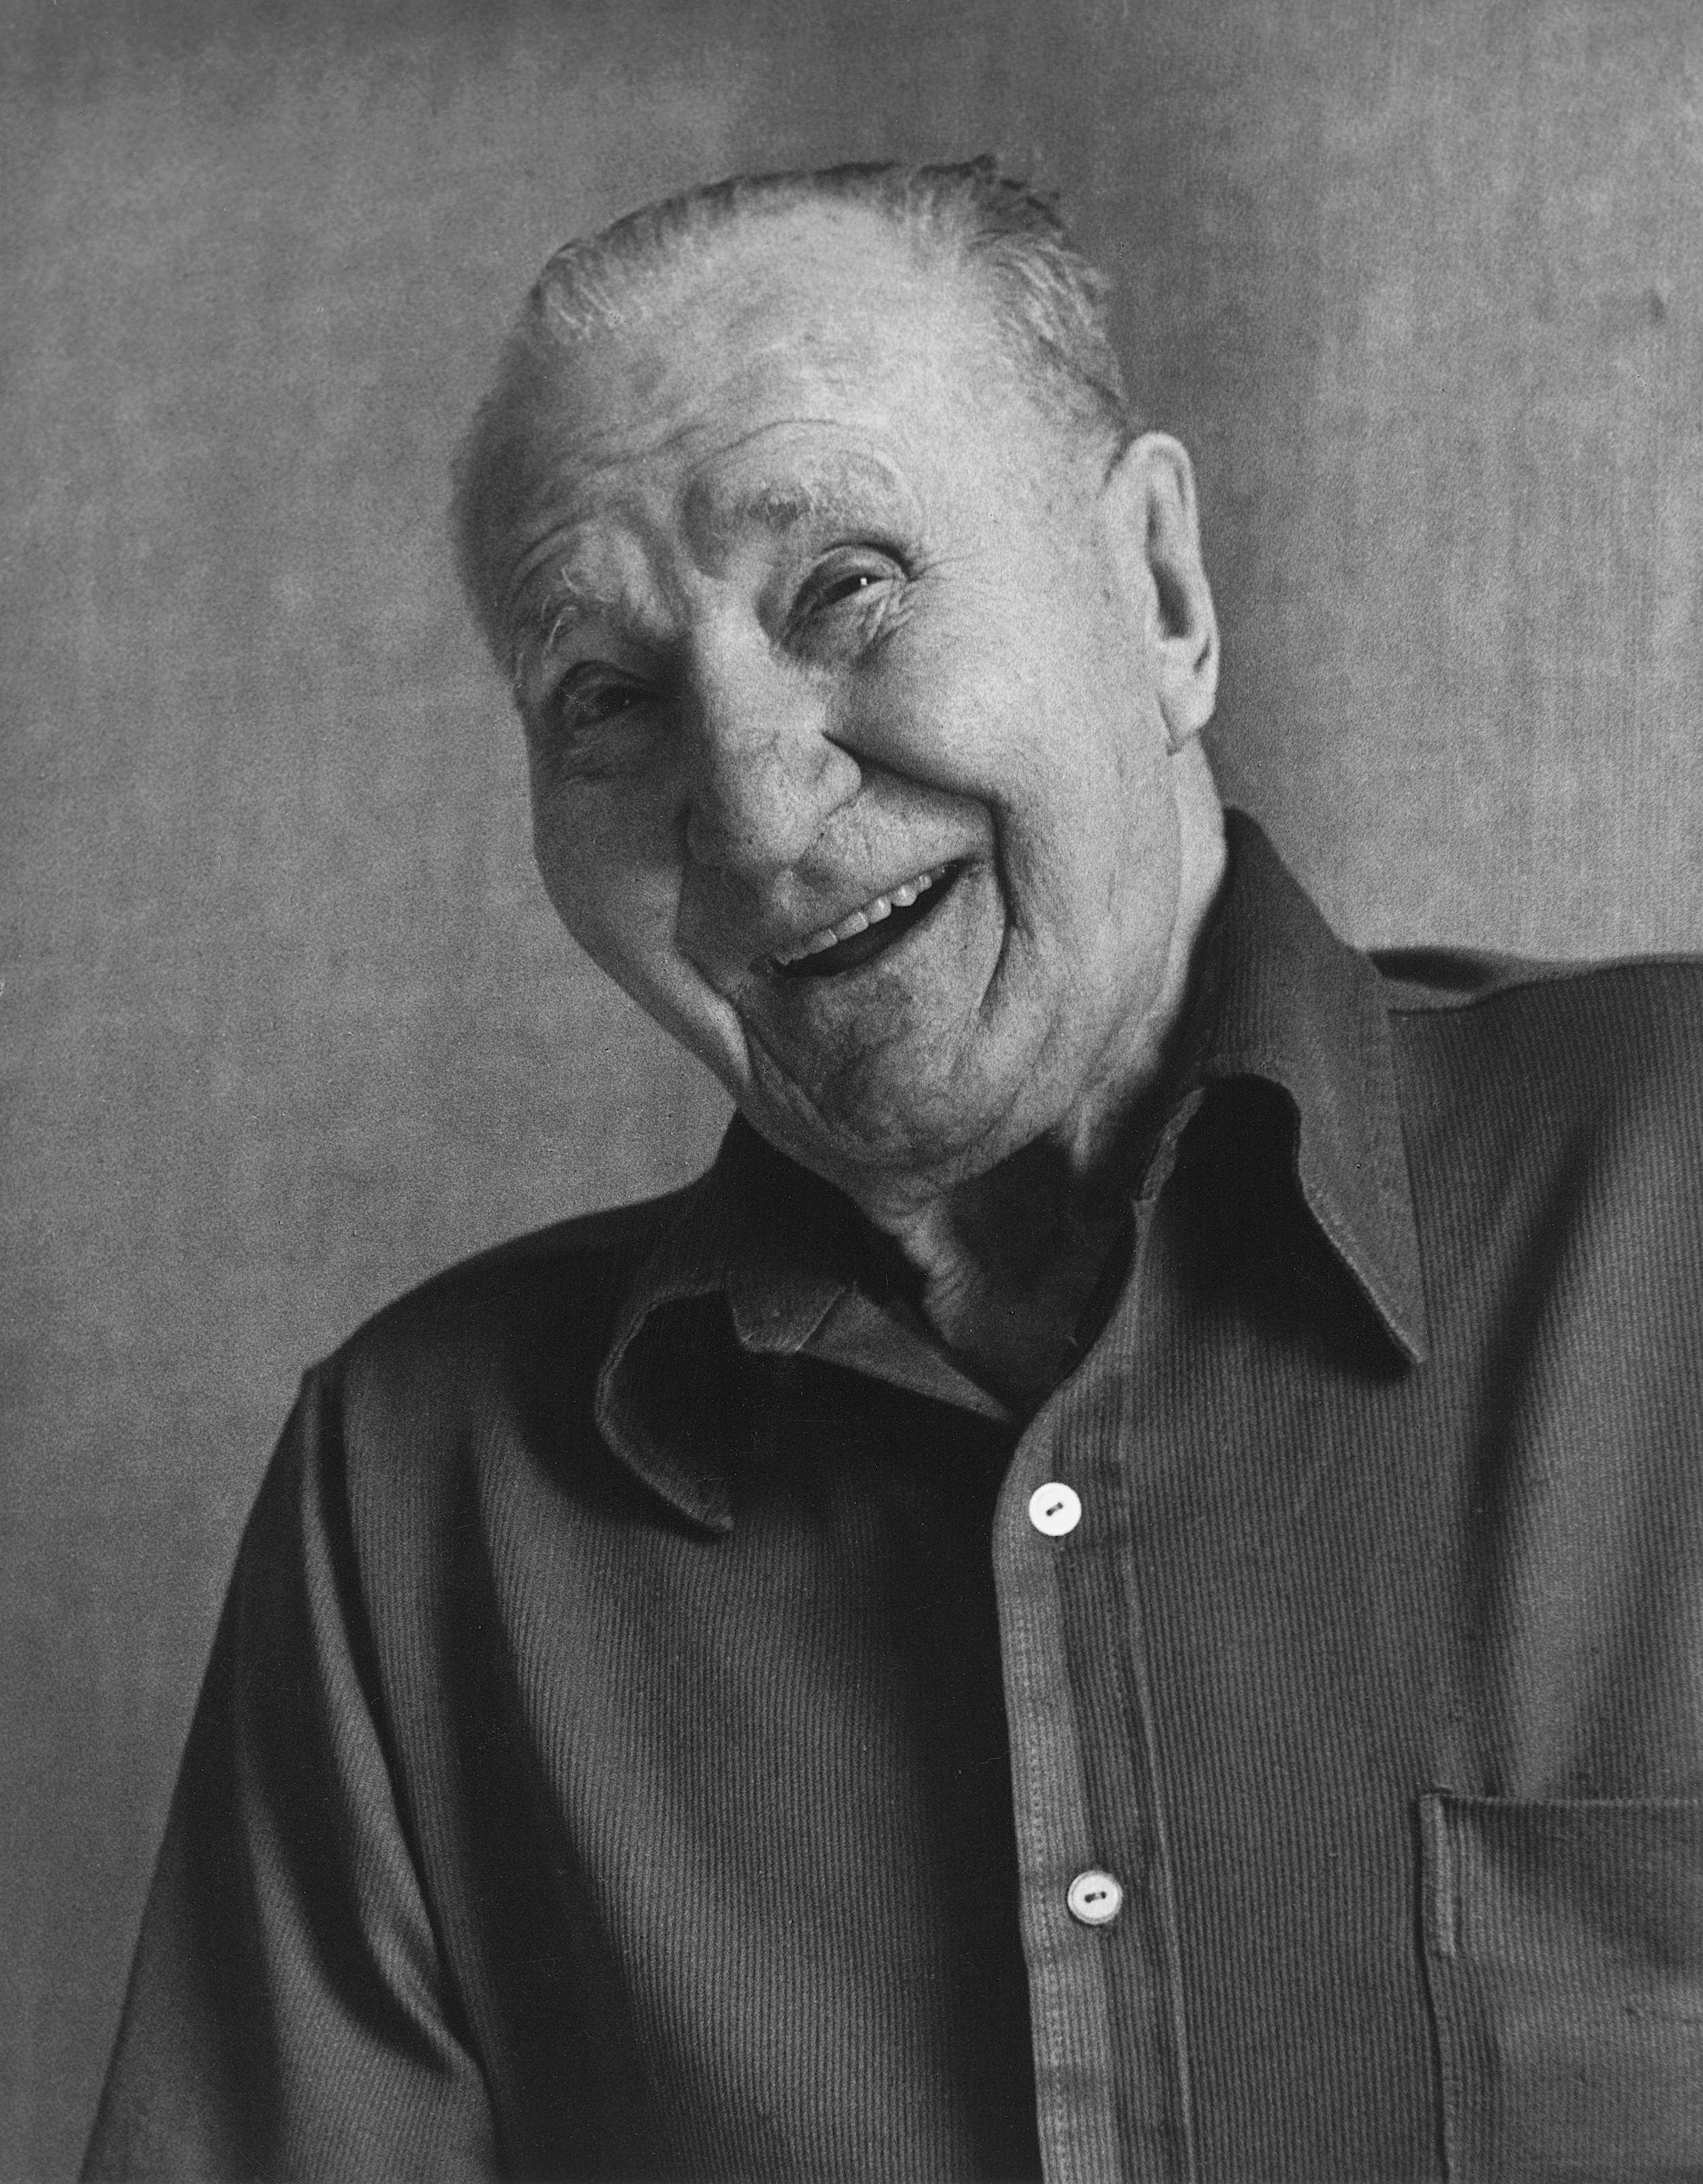 Black and white photo of elderly man portrait with friendly, happy face wearing nice button shirt.